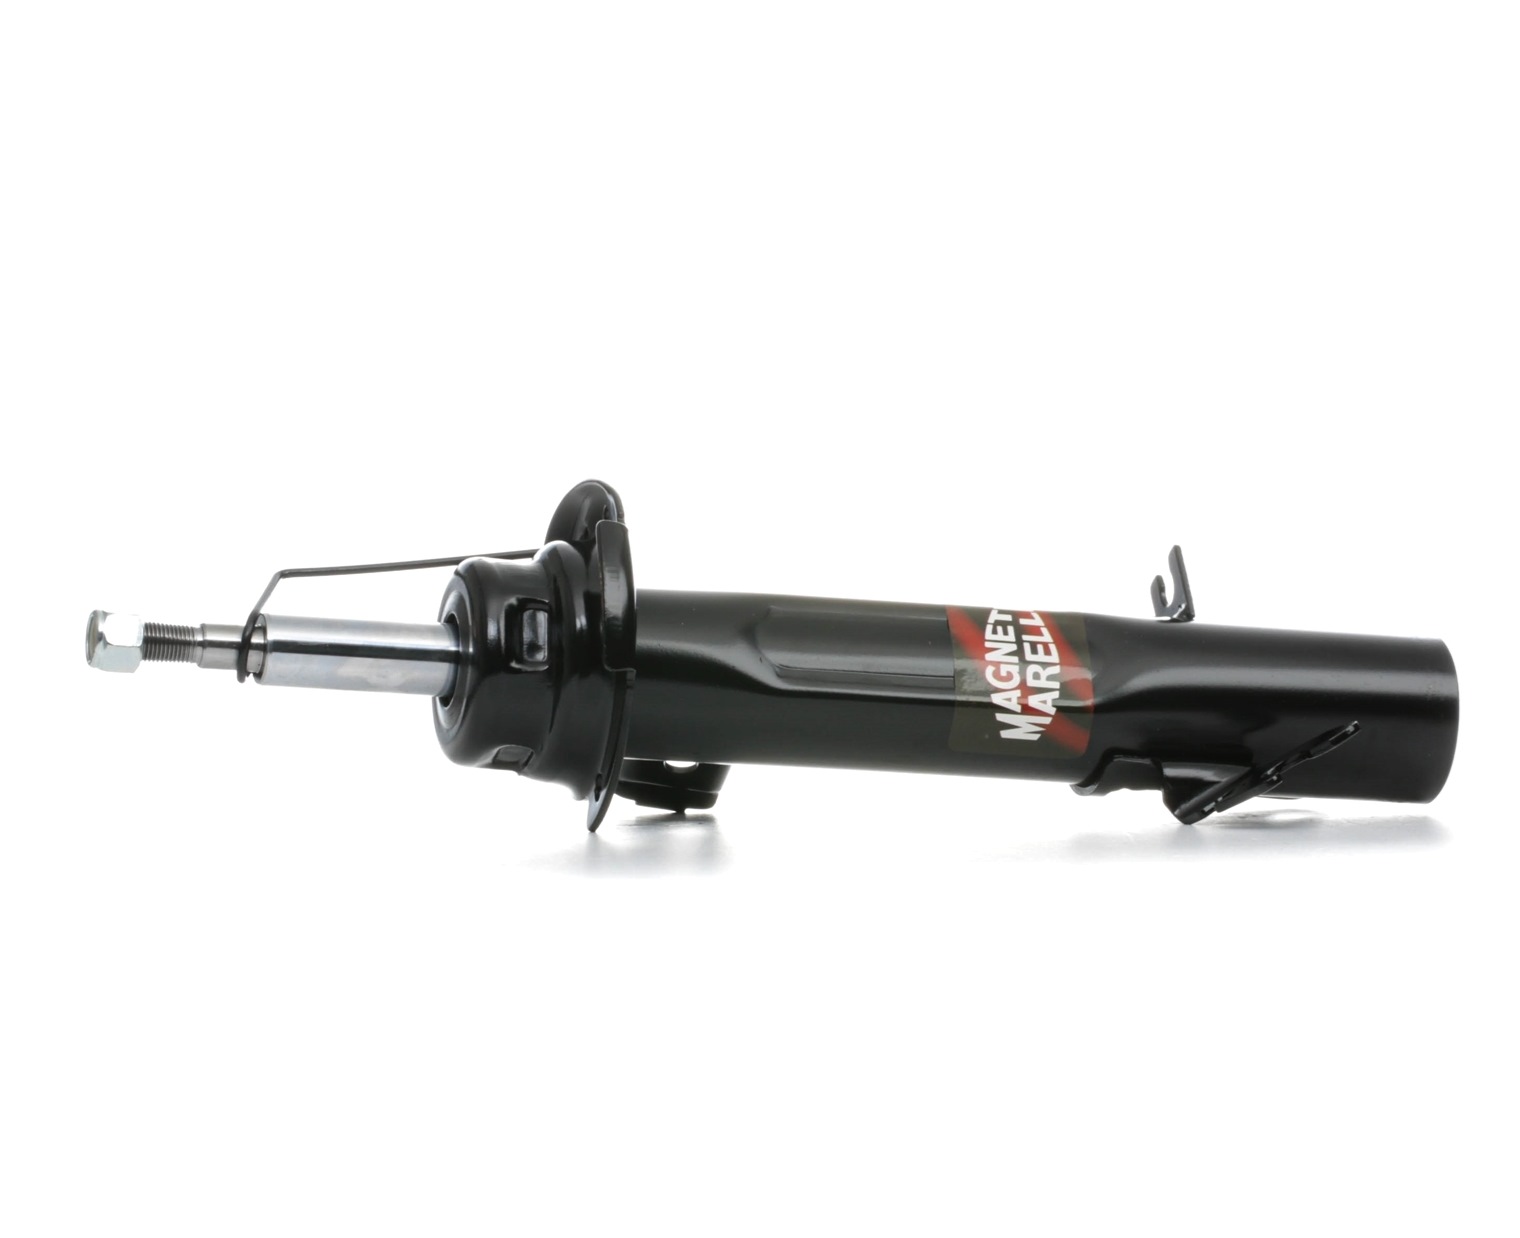 MAGNETI MARELLI 357111070100 Shock absorber Front Axle Right, Gas Pressure, Twin-Tube, Suspension Strut, Top pin